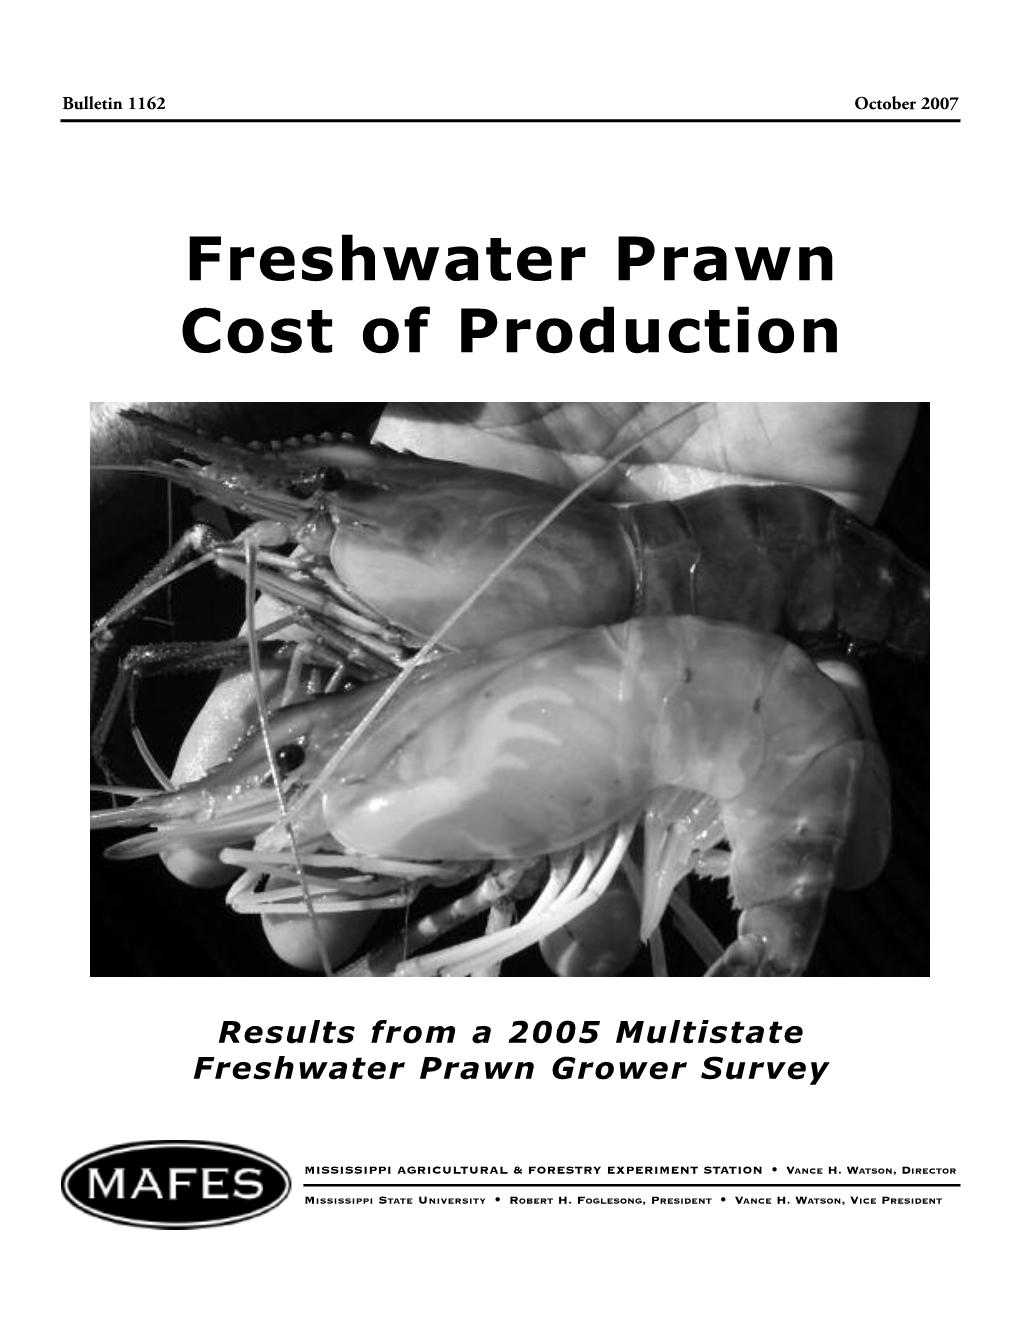 Freshwater Prawn Cost of Production